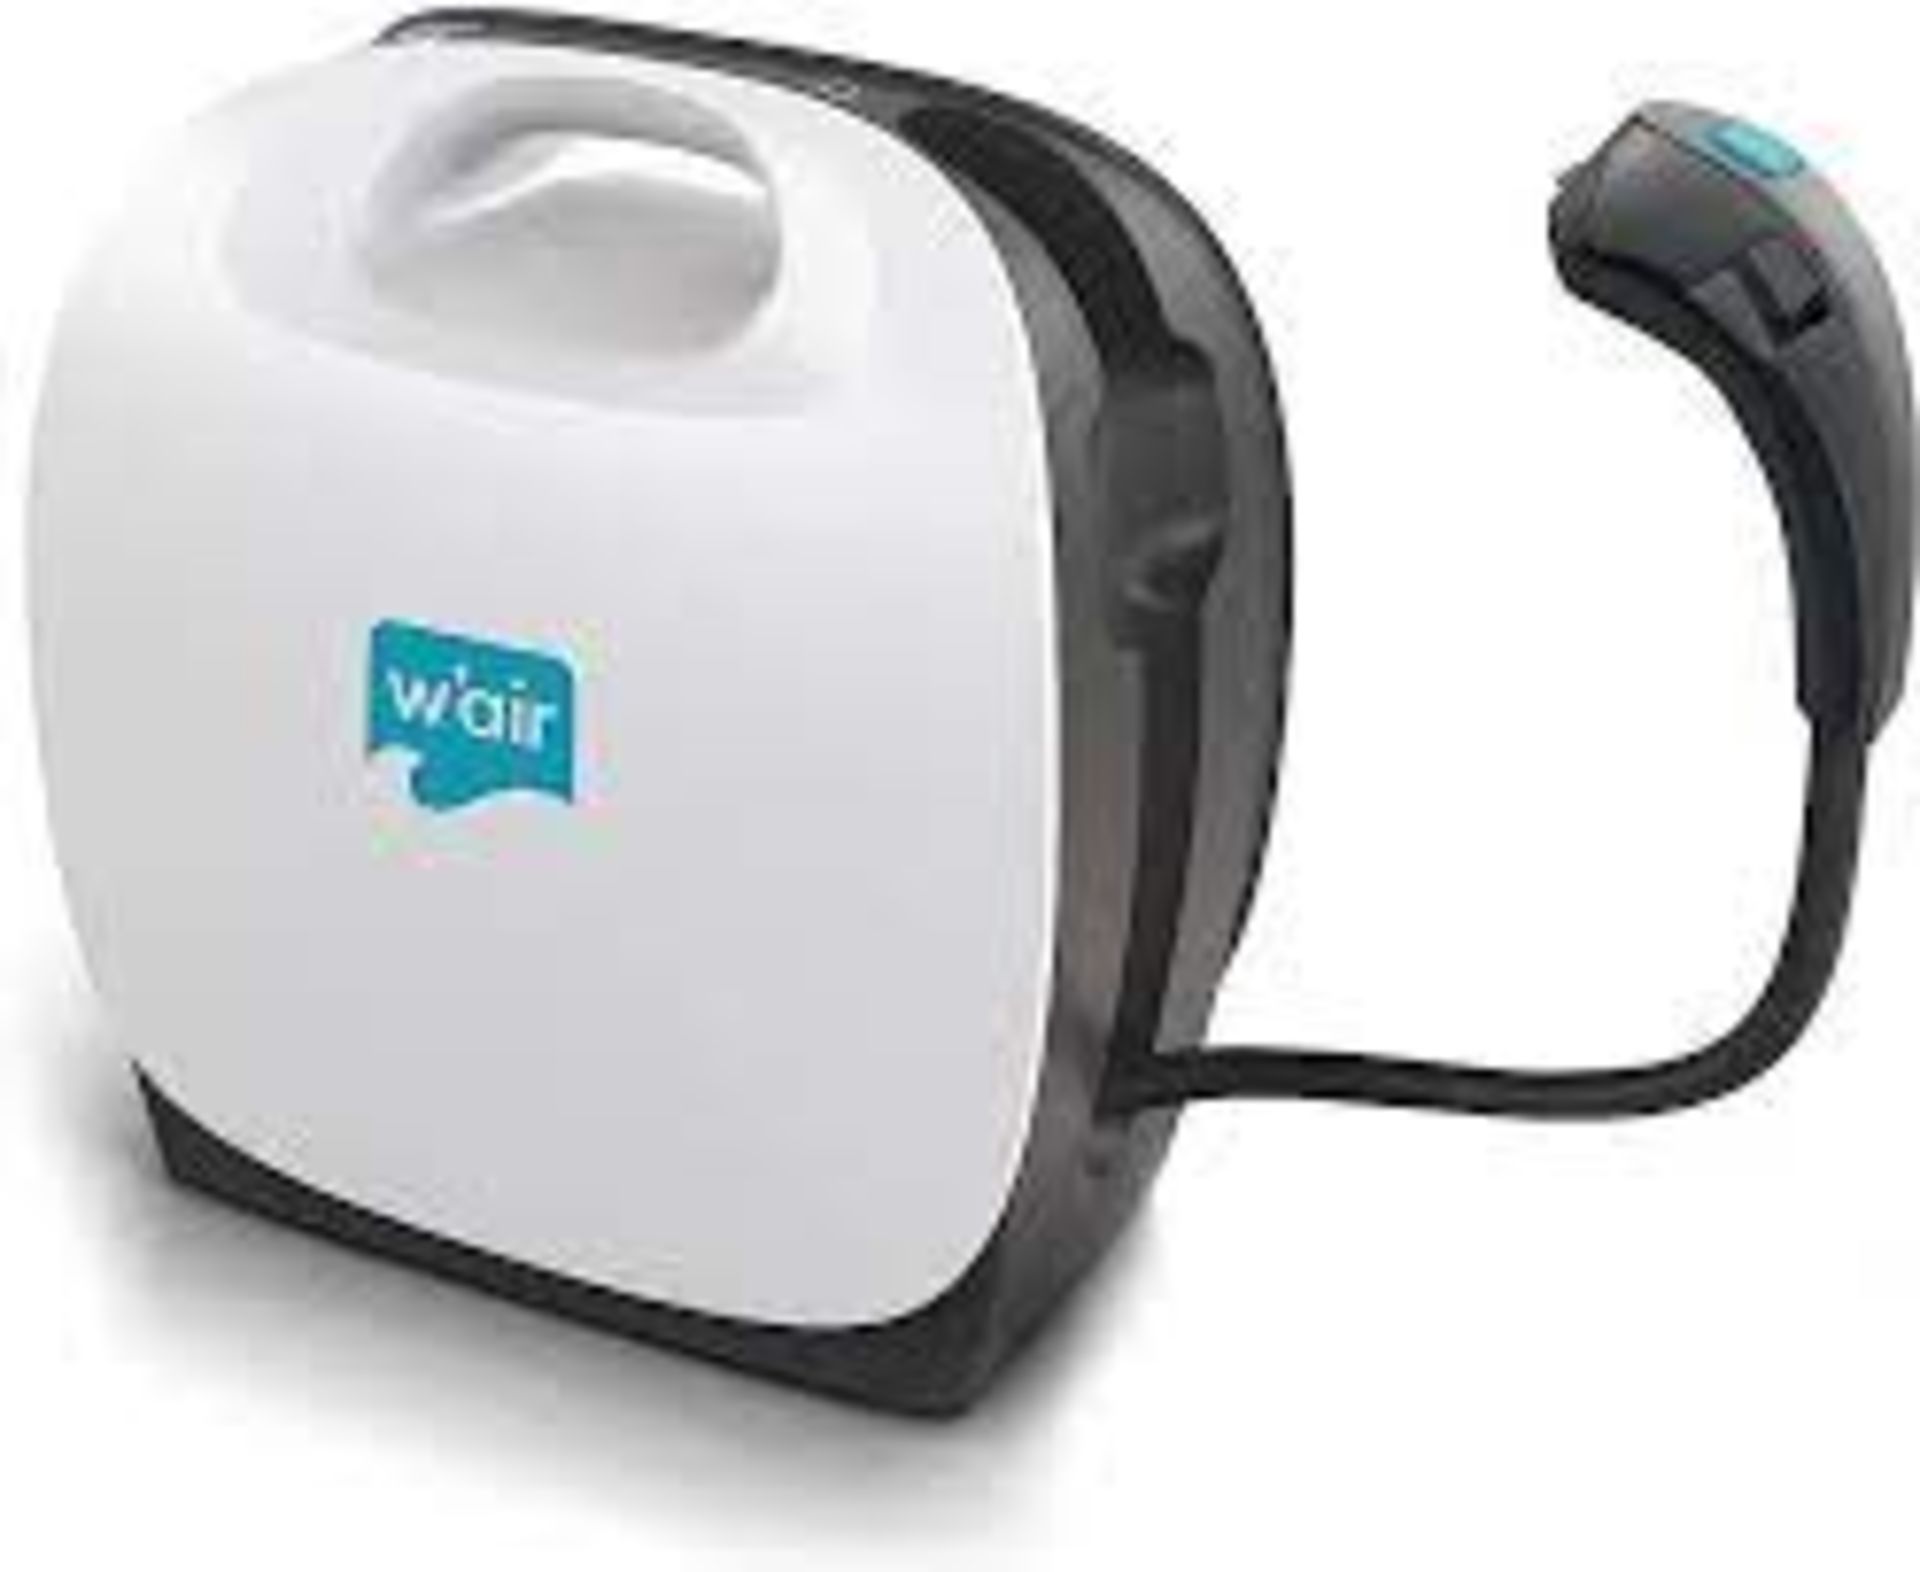 5 X BRAND NEW W'AIR SNEAKER CLEANING SYSTEMS RRP £299, The w'air uses hydrodynamic technology - Bild 6 aus 6